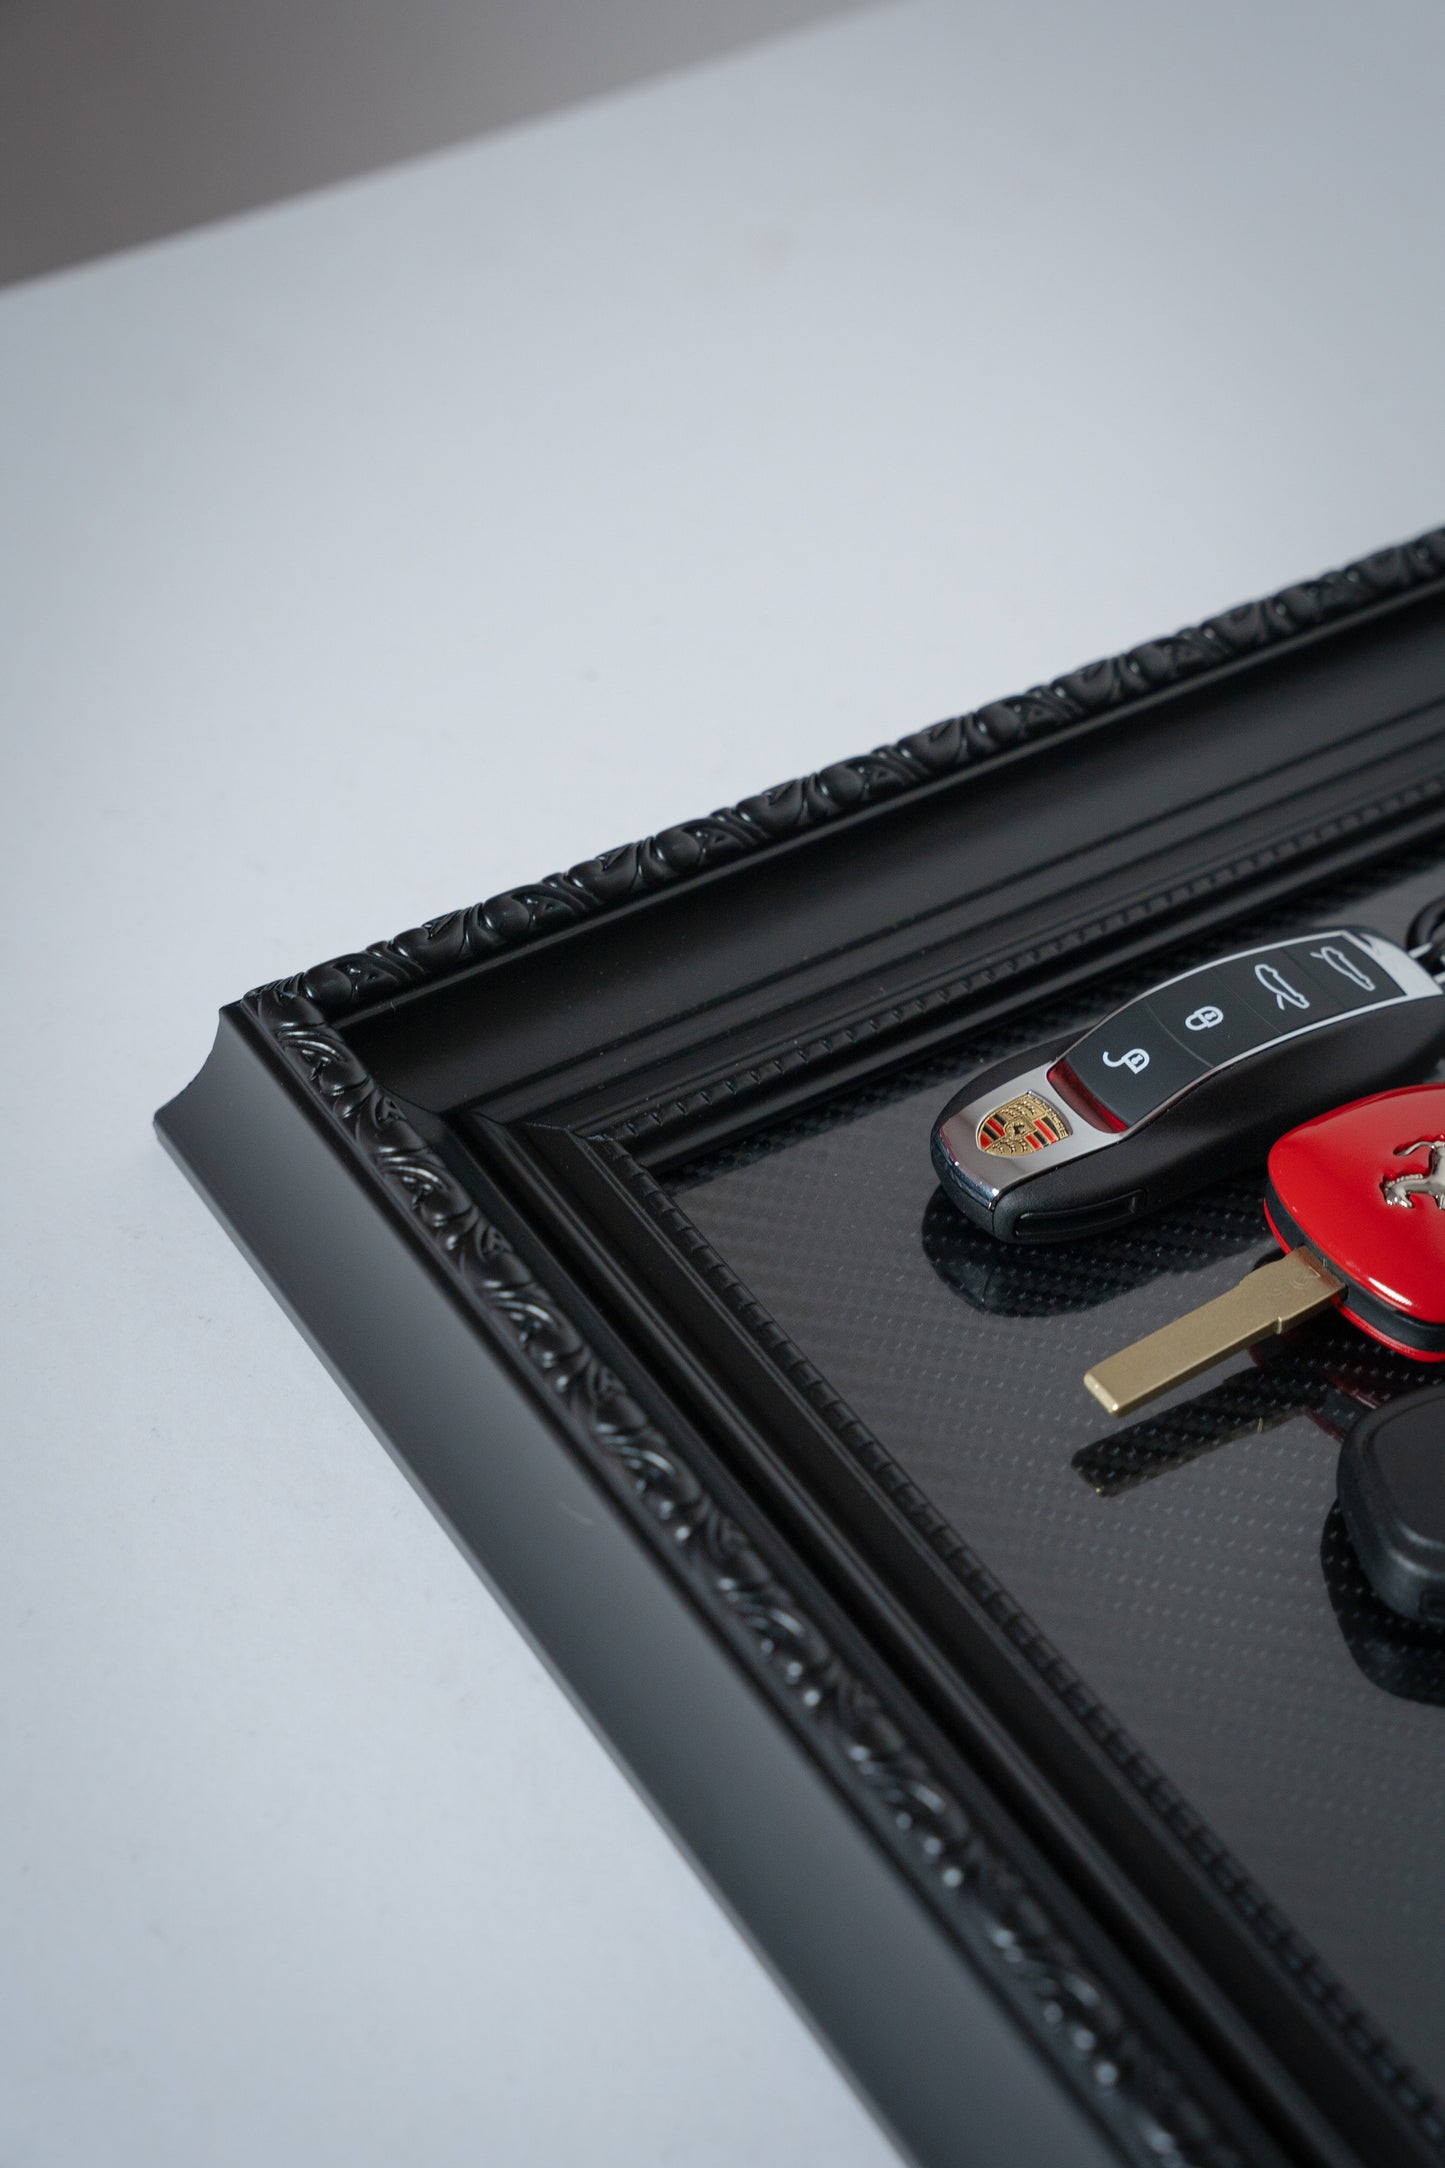 'The Dream' - Car Key Collection